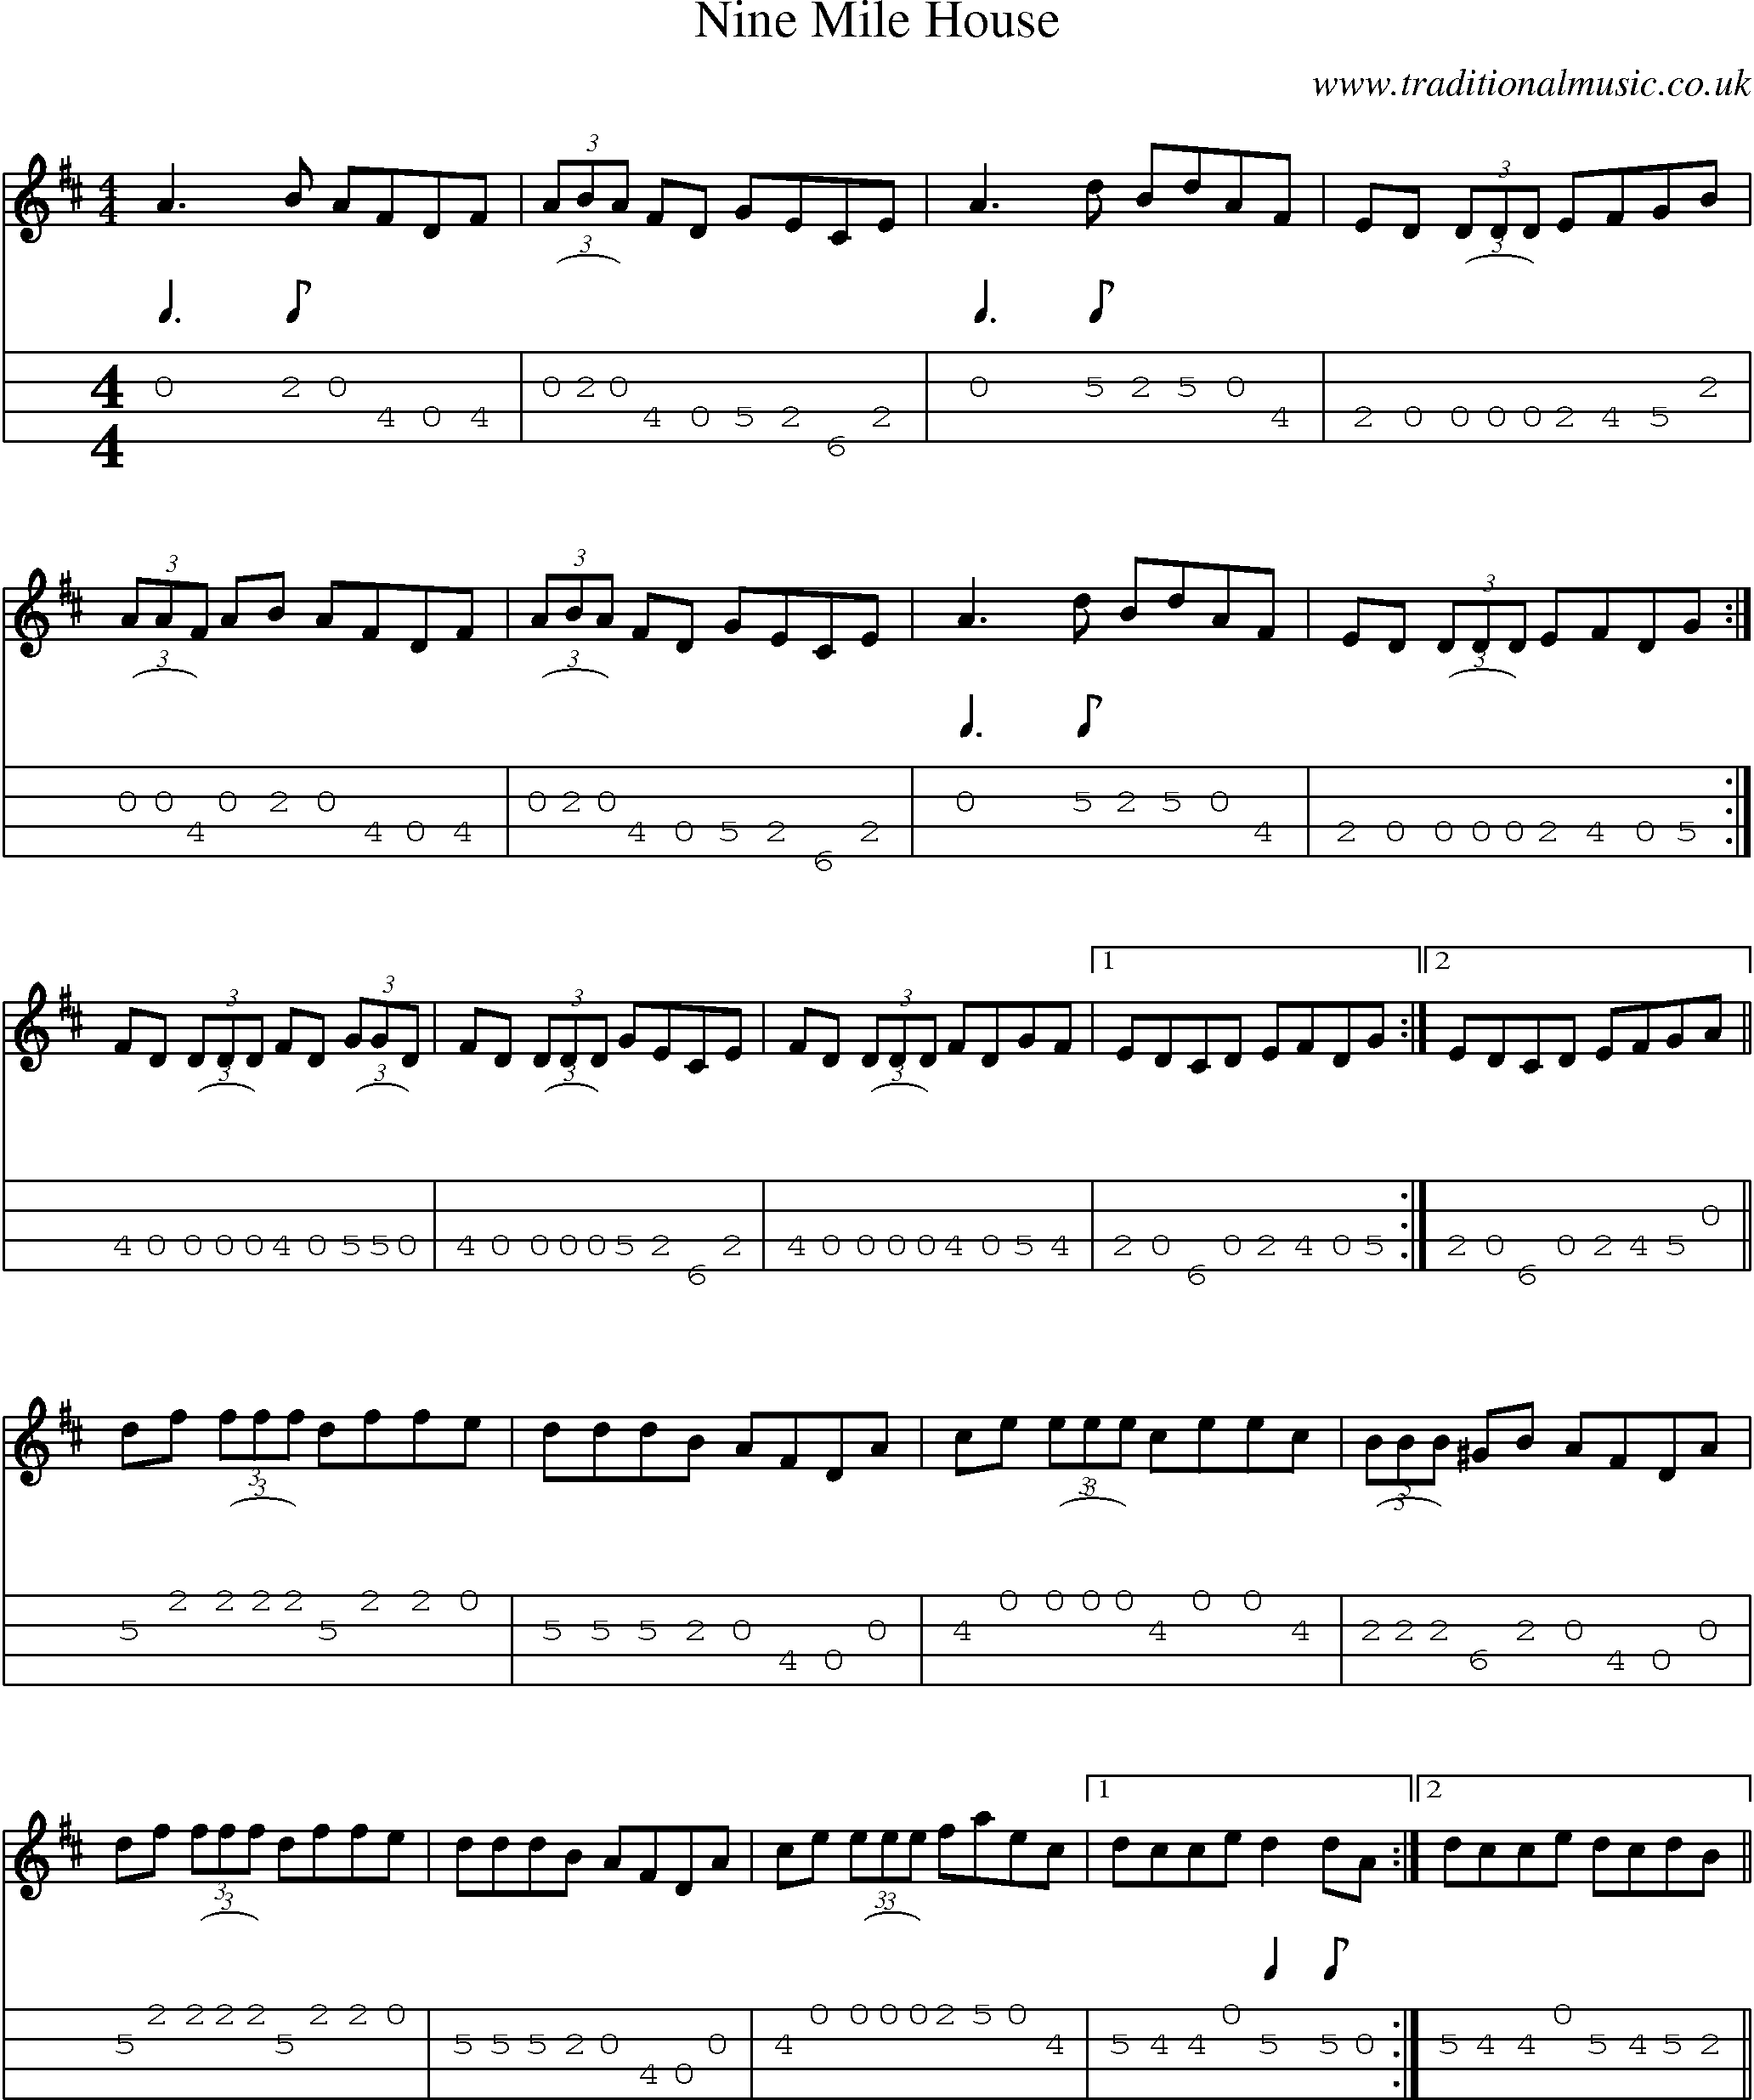 Music Score and Mandolin Tabs for Nine Mile House